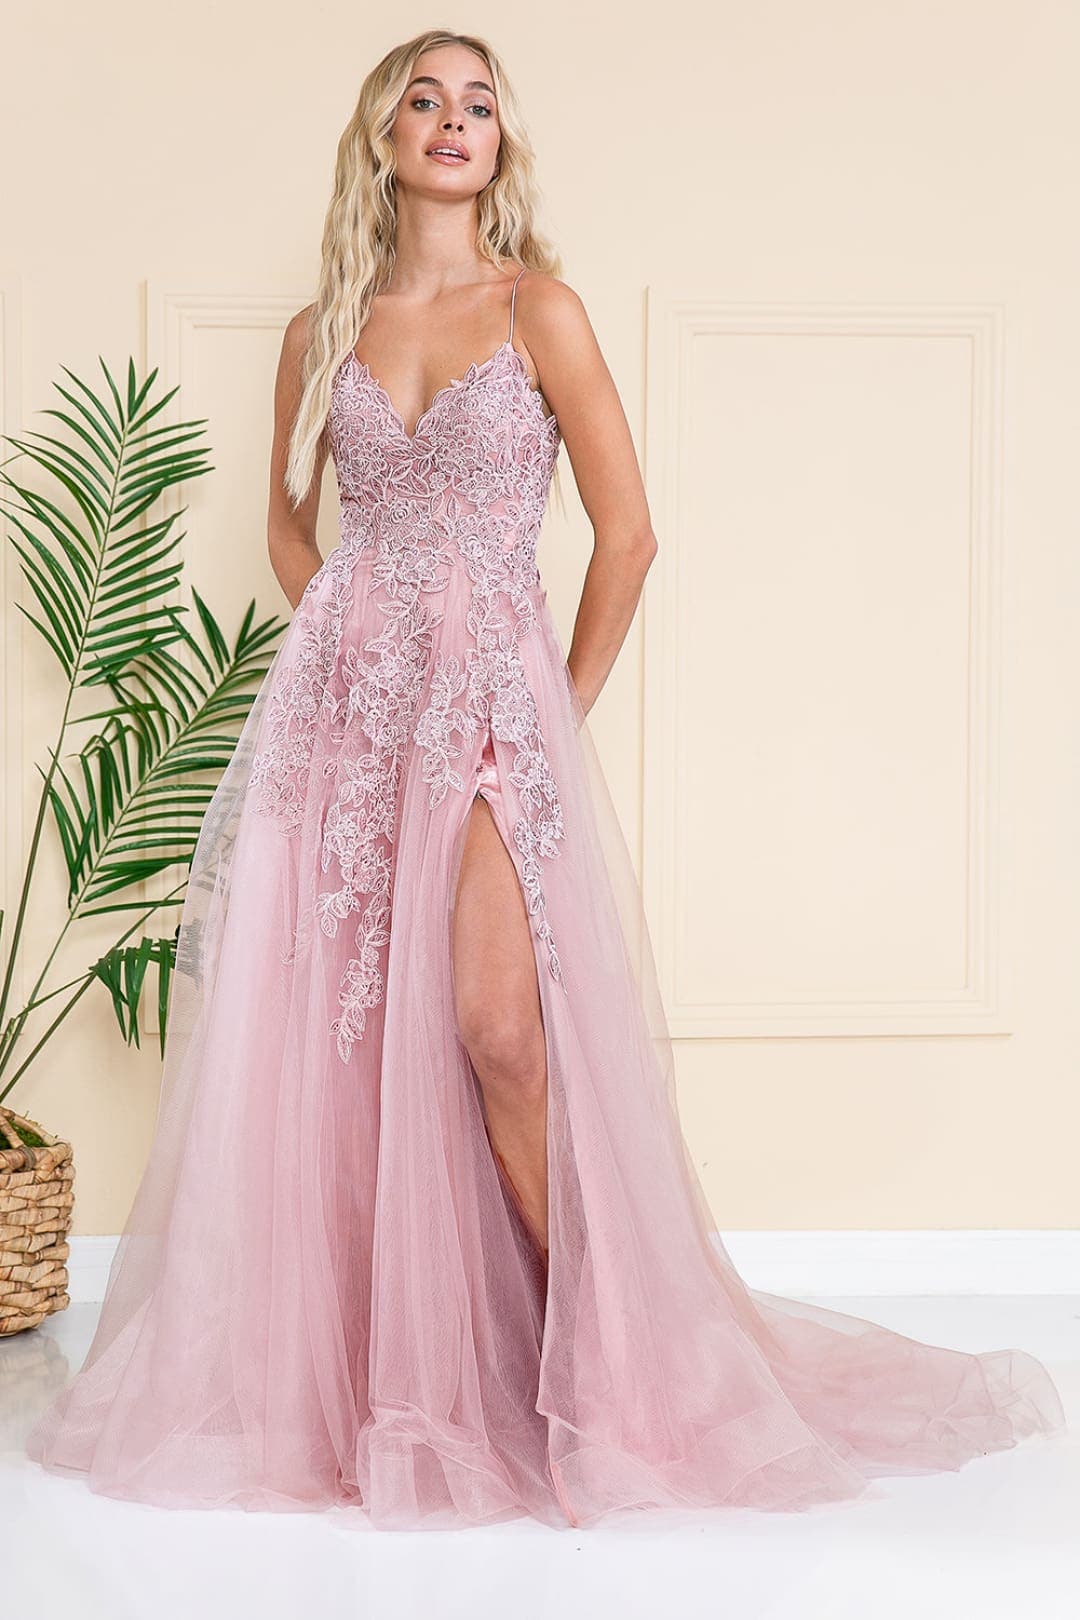 Embroidered Sexy Prom Dress - ROSE / 2